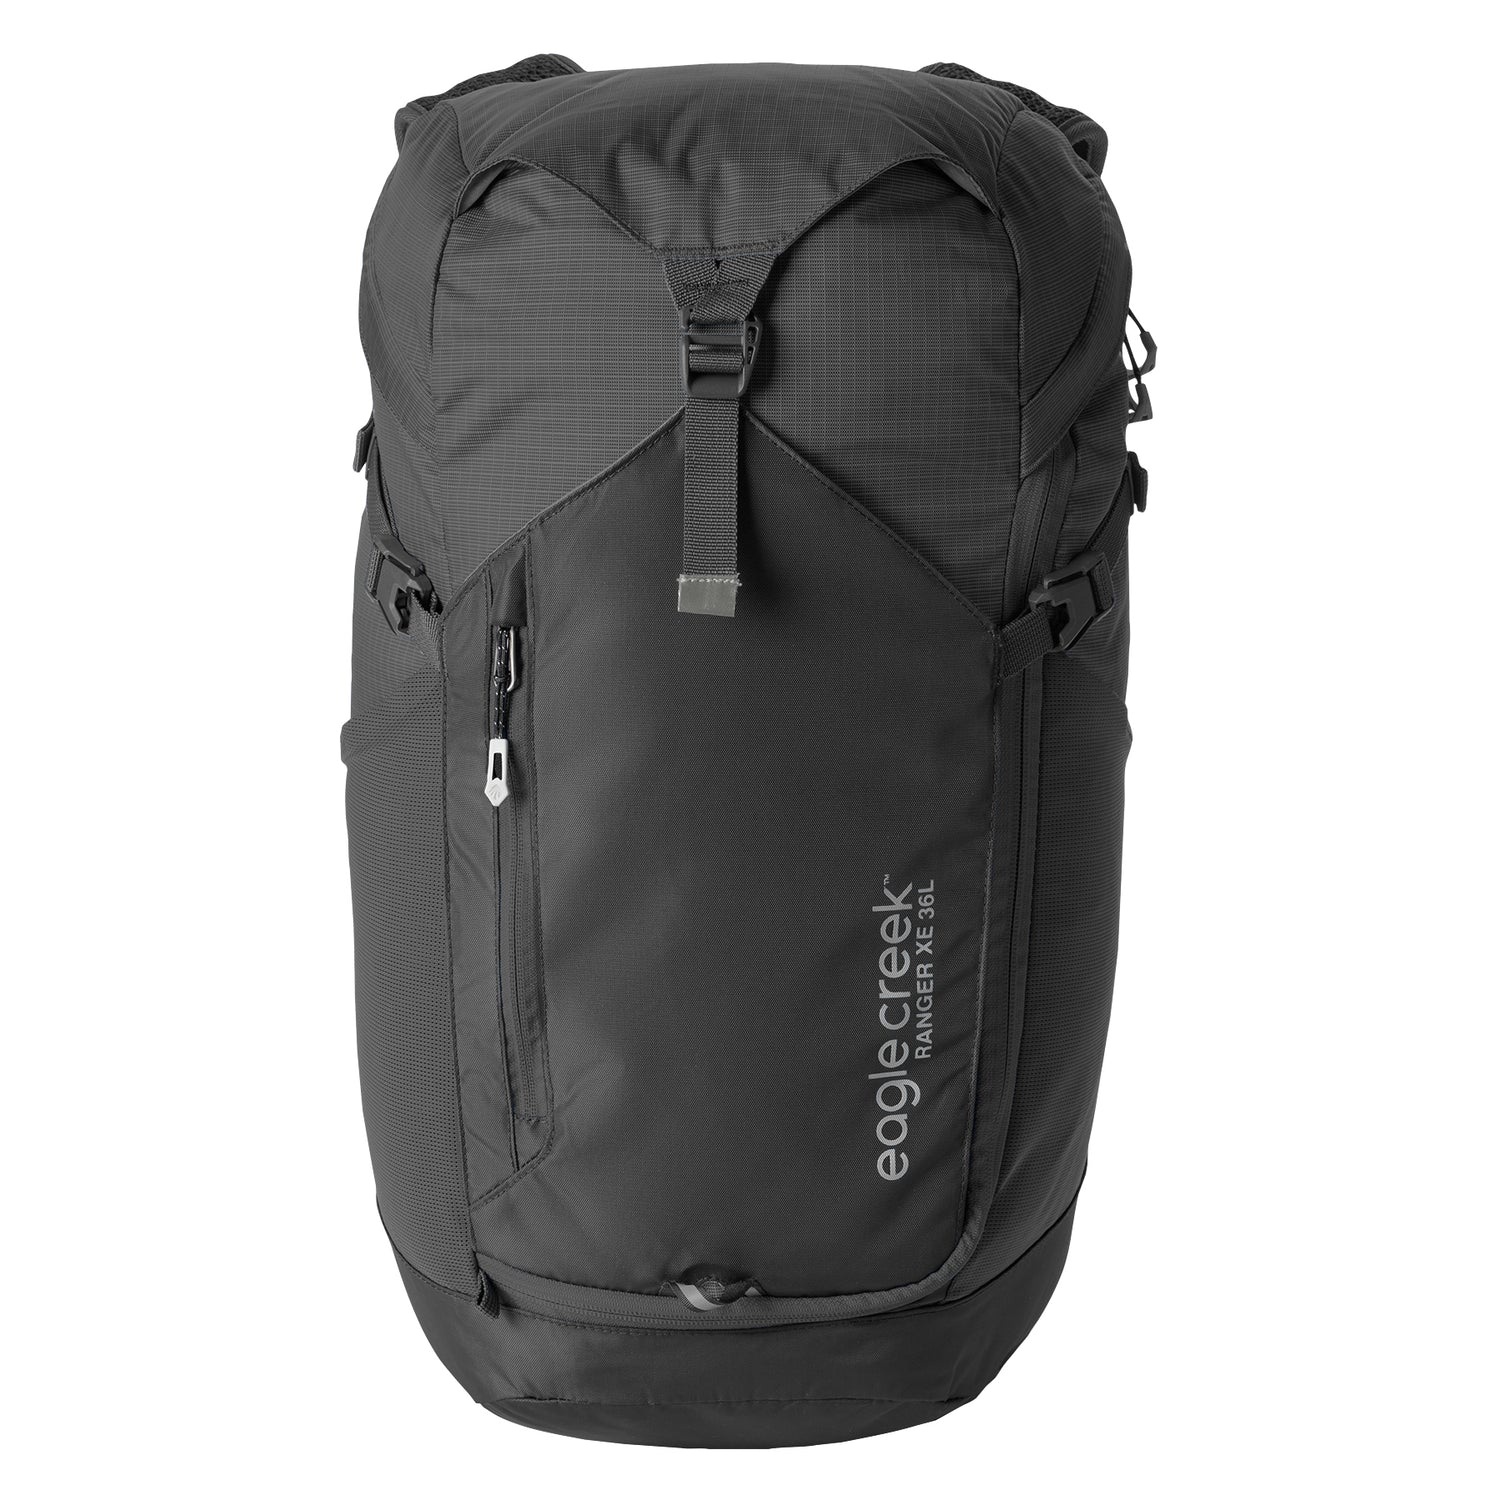 See how we measure the Classic 36L Backpack's volume using the